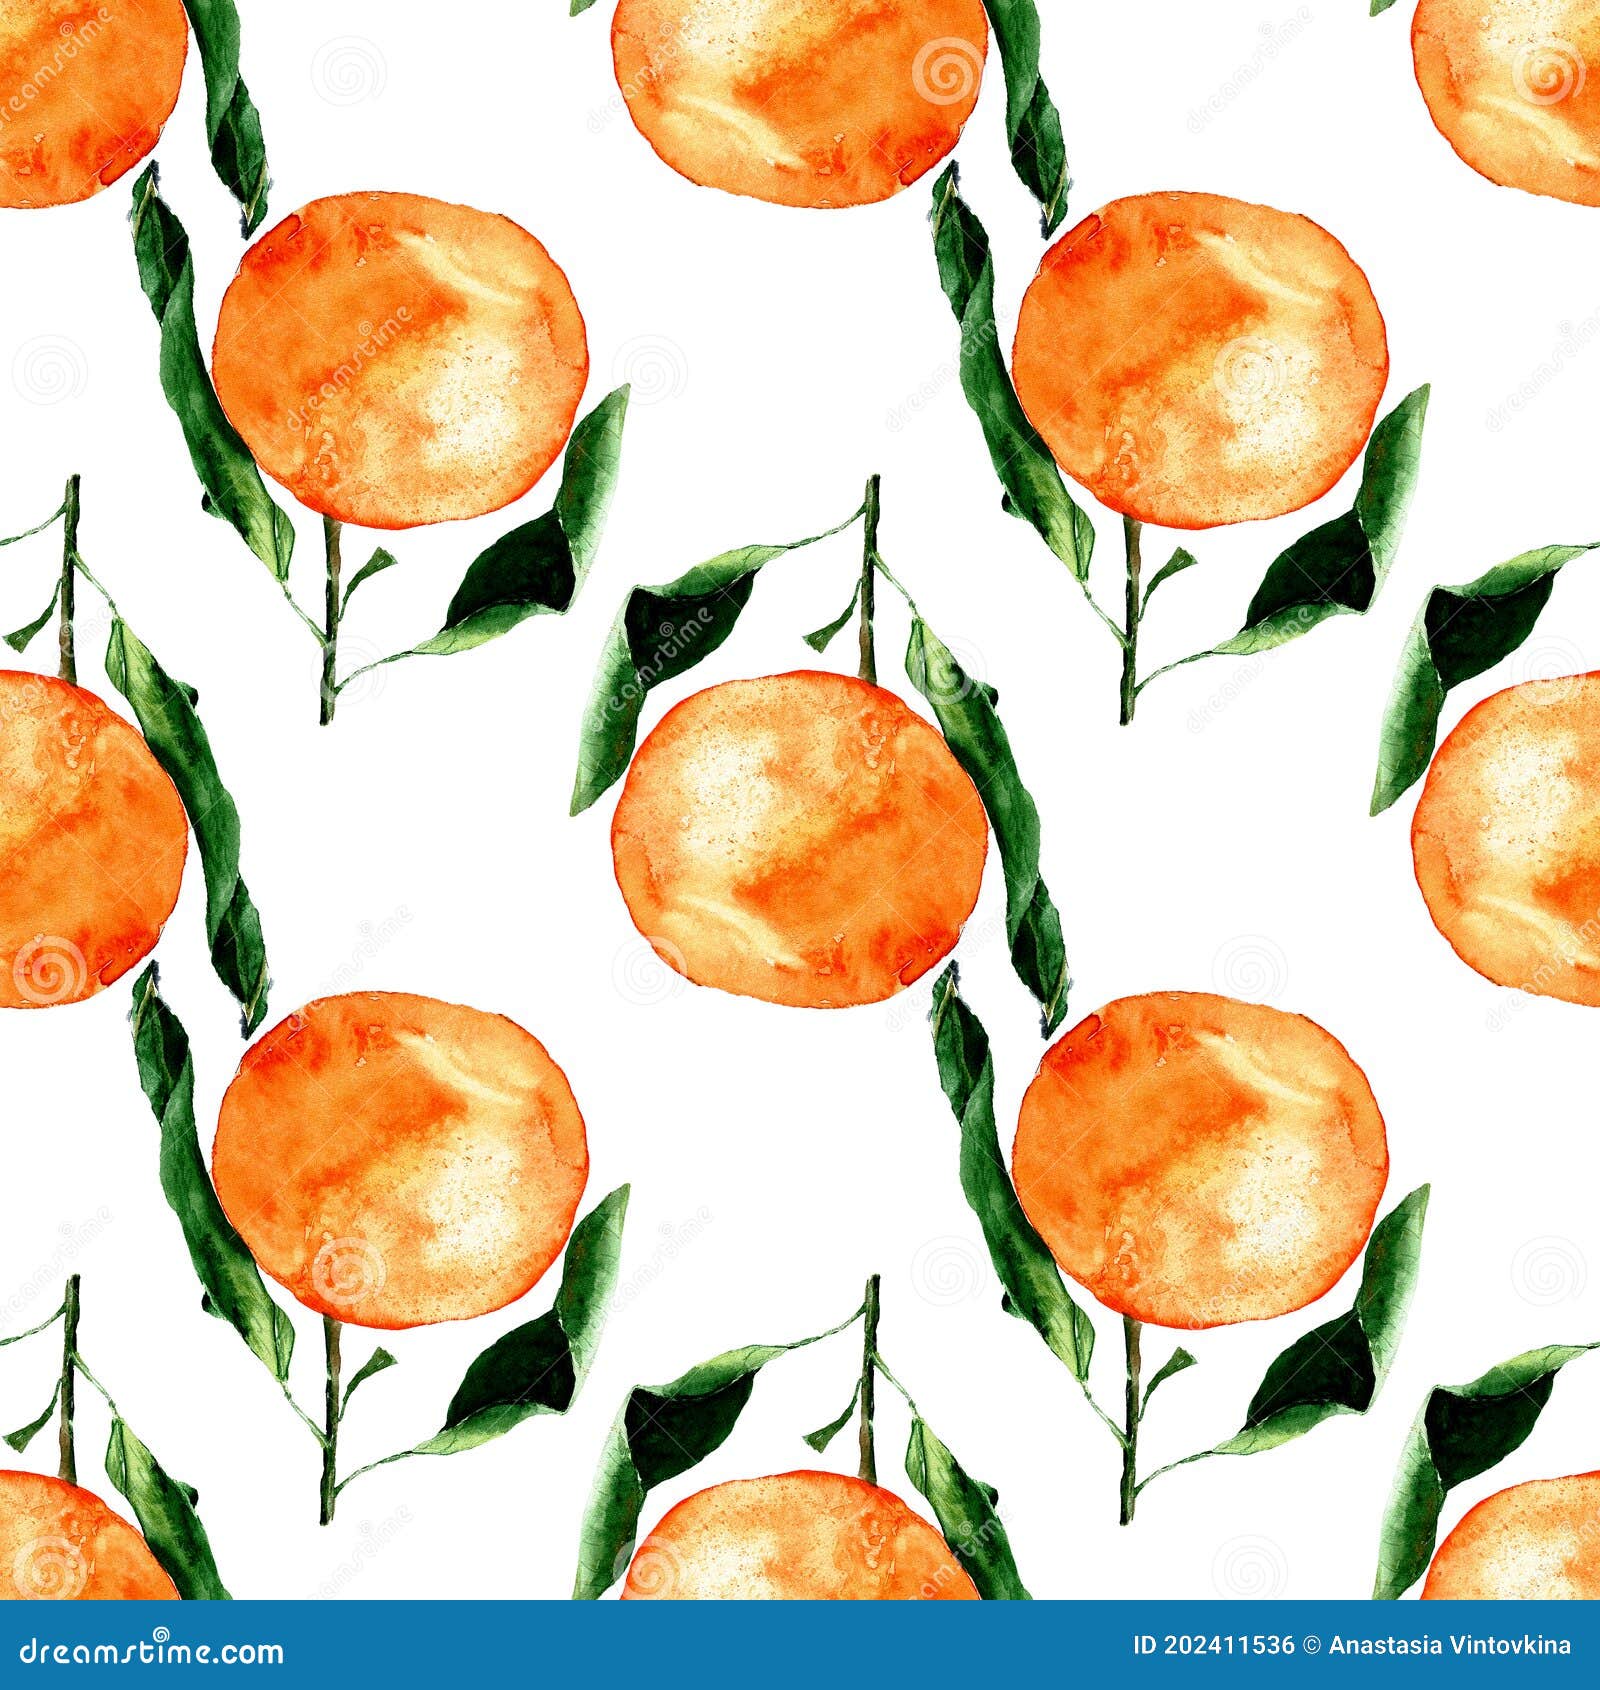 One Tangerine Seamless Pattern with Leaves Isolated on a White ...